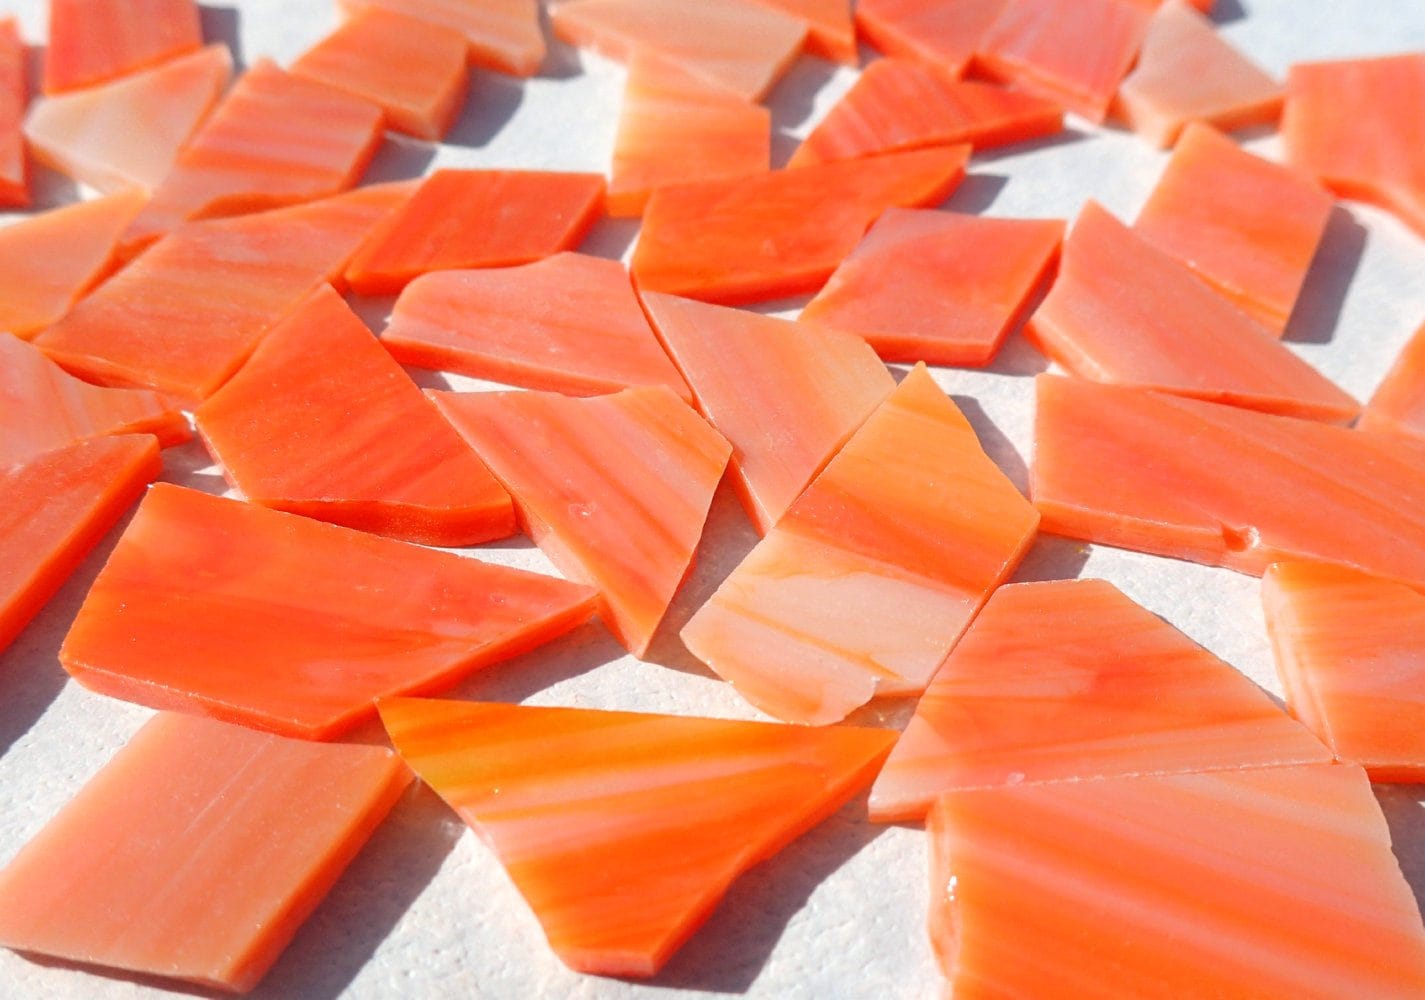 Stained Glass Mosaic Tiles in Orange Creamsicle - 1/2 Pound - 5-15 mm Various Shapes